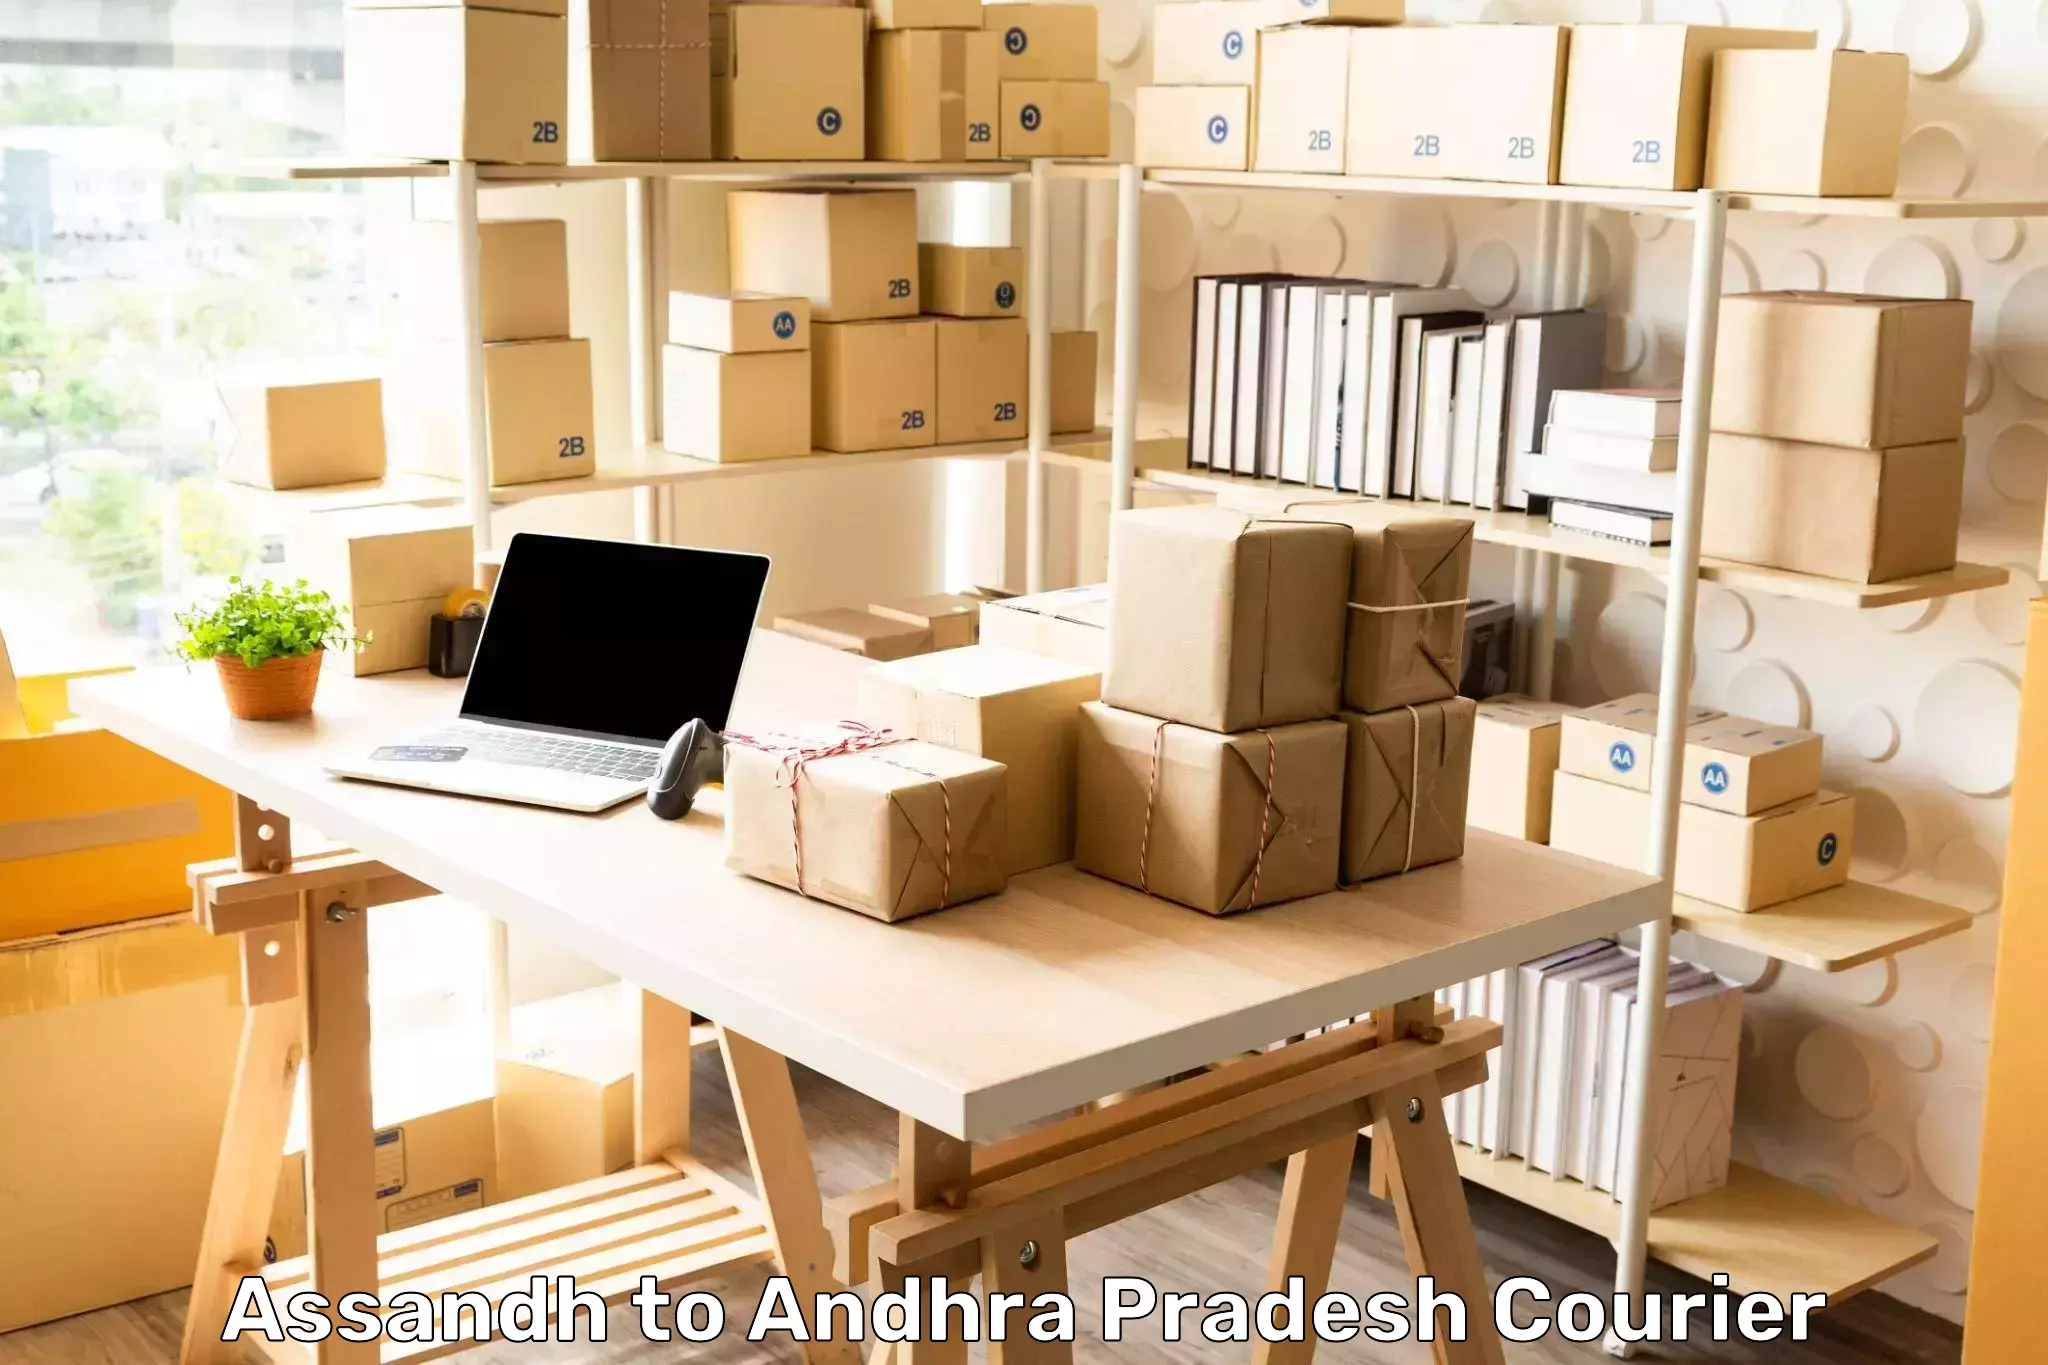 On-demand delivery Assandh to Andhra Pradesh